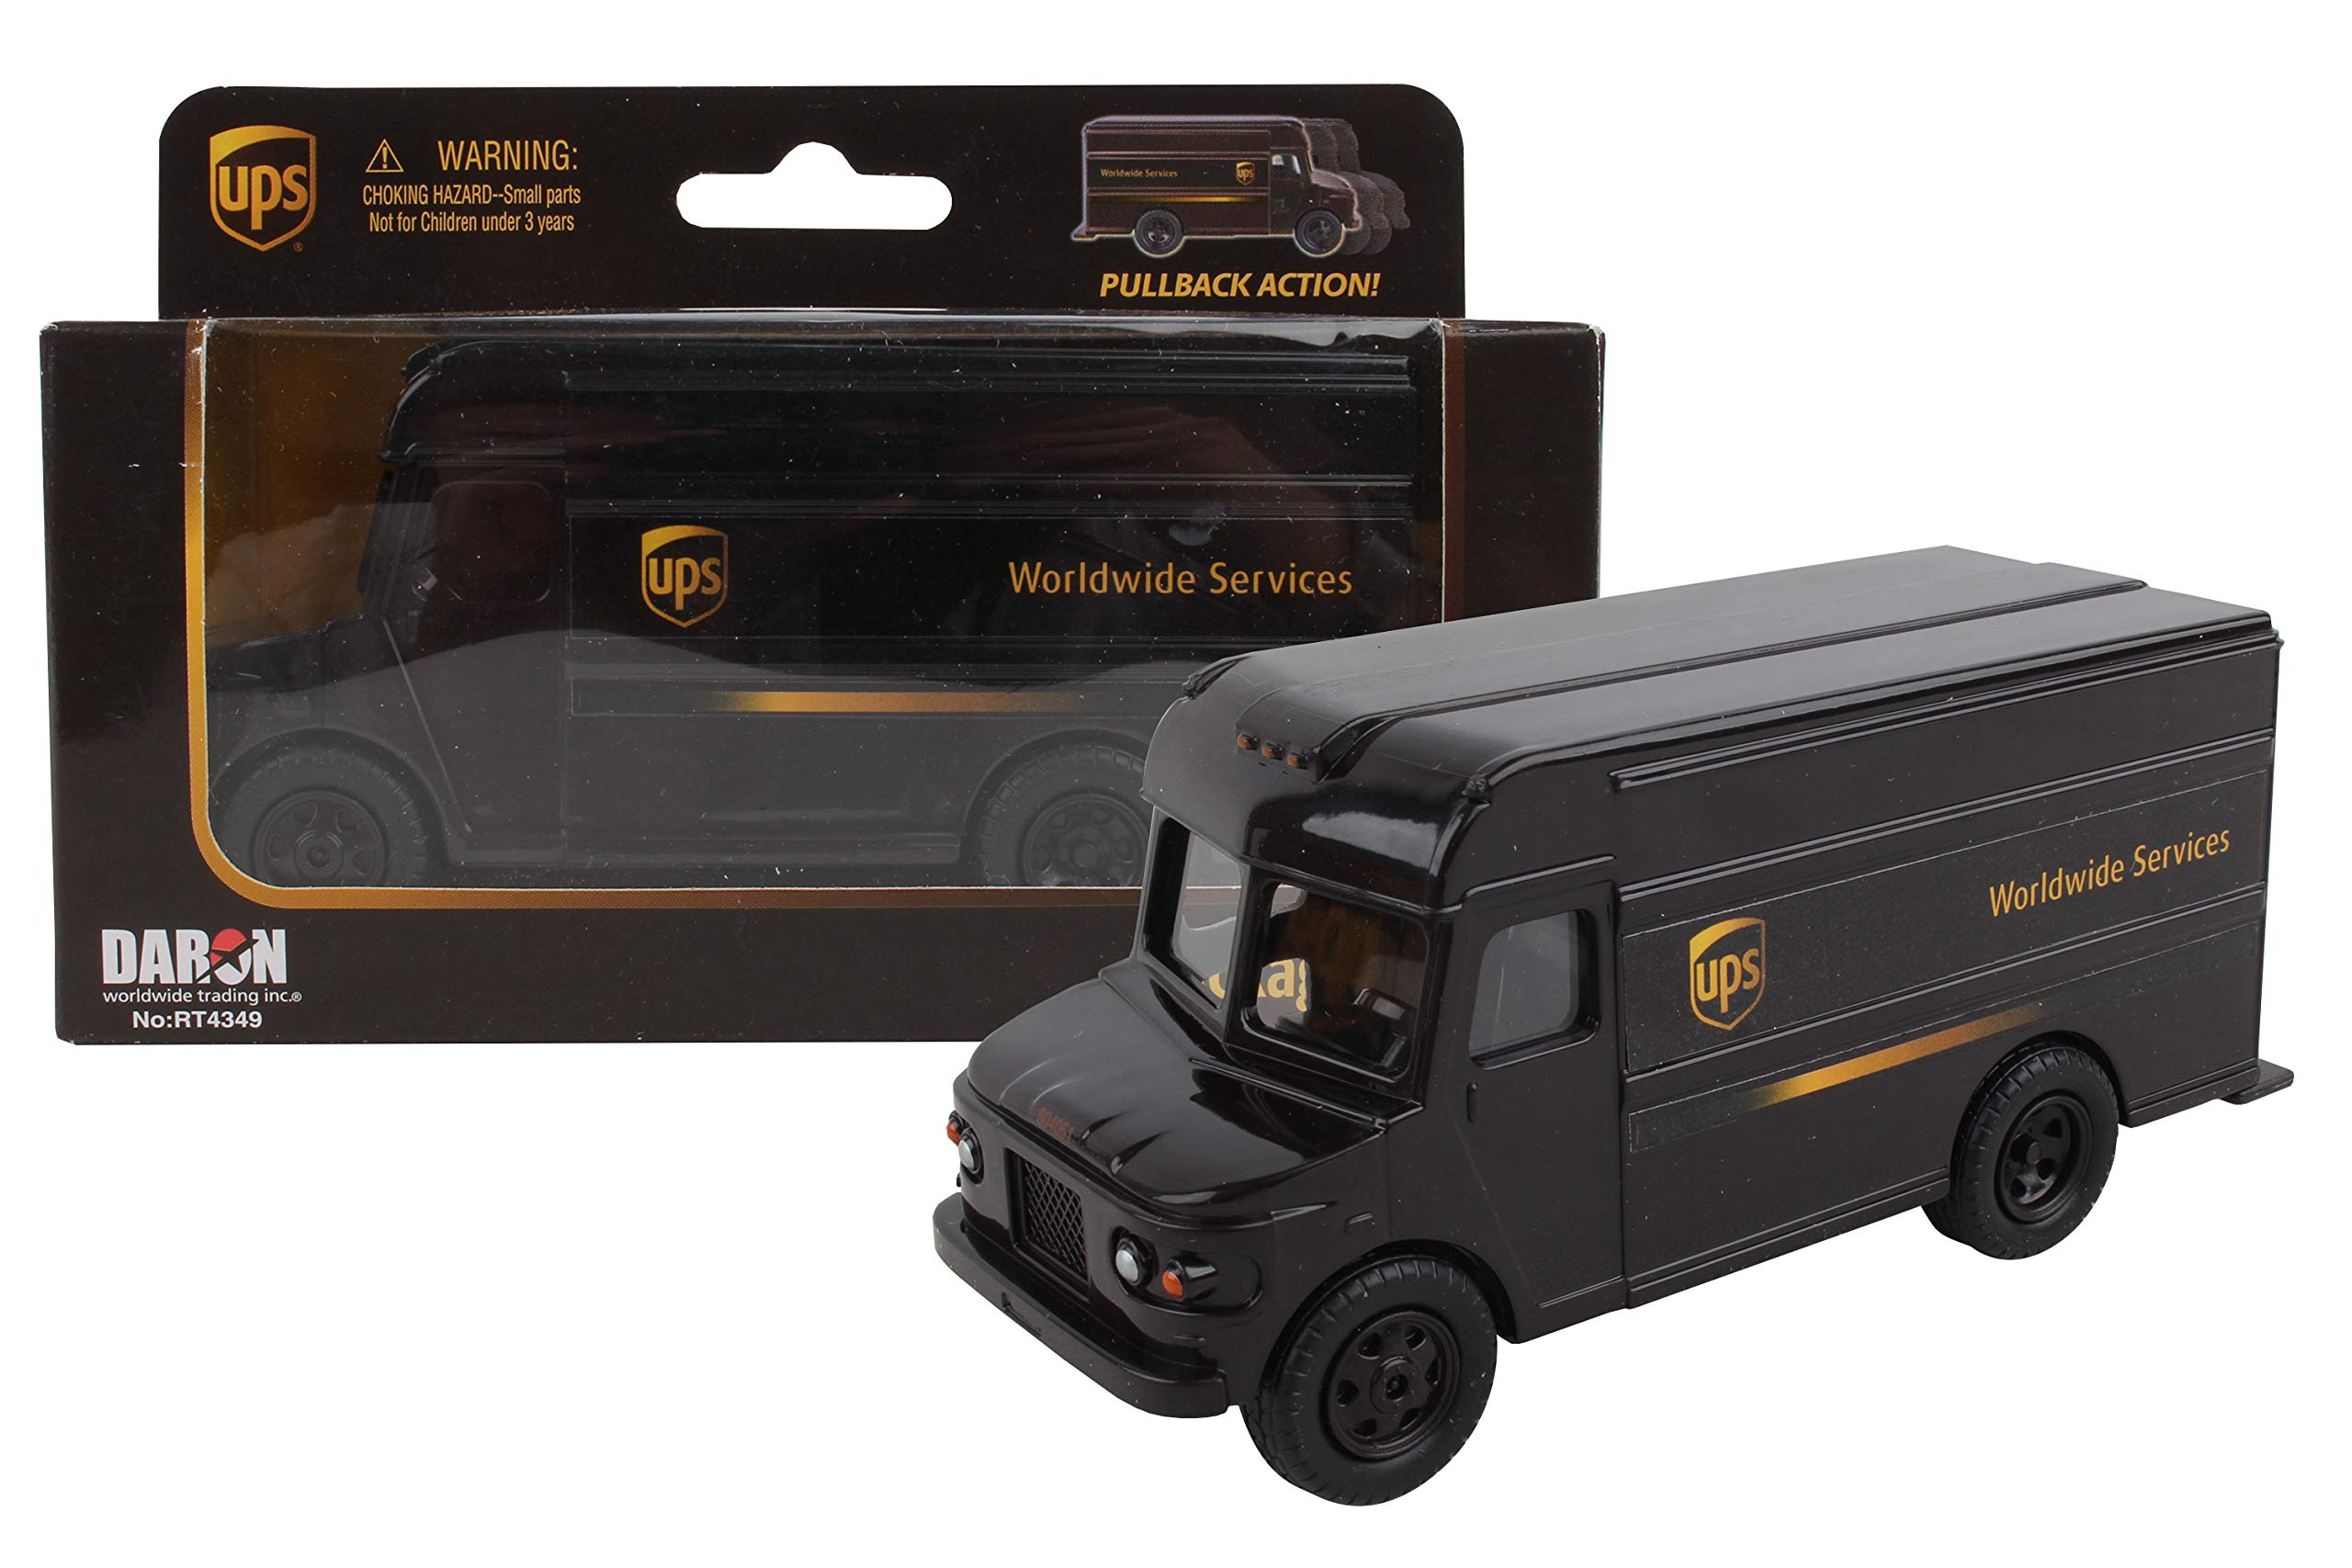 Package delivery truck